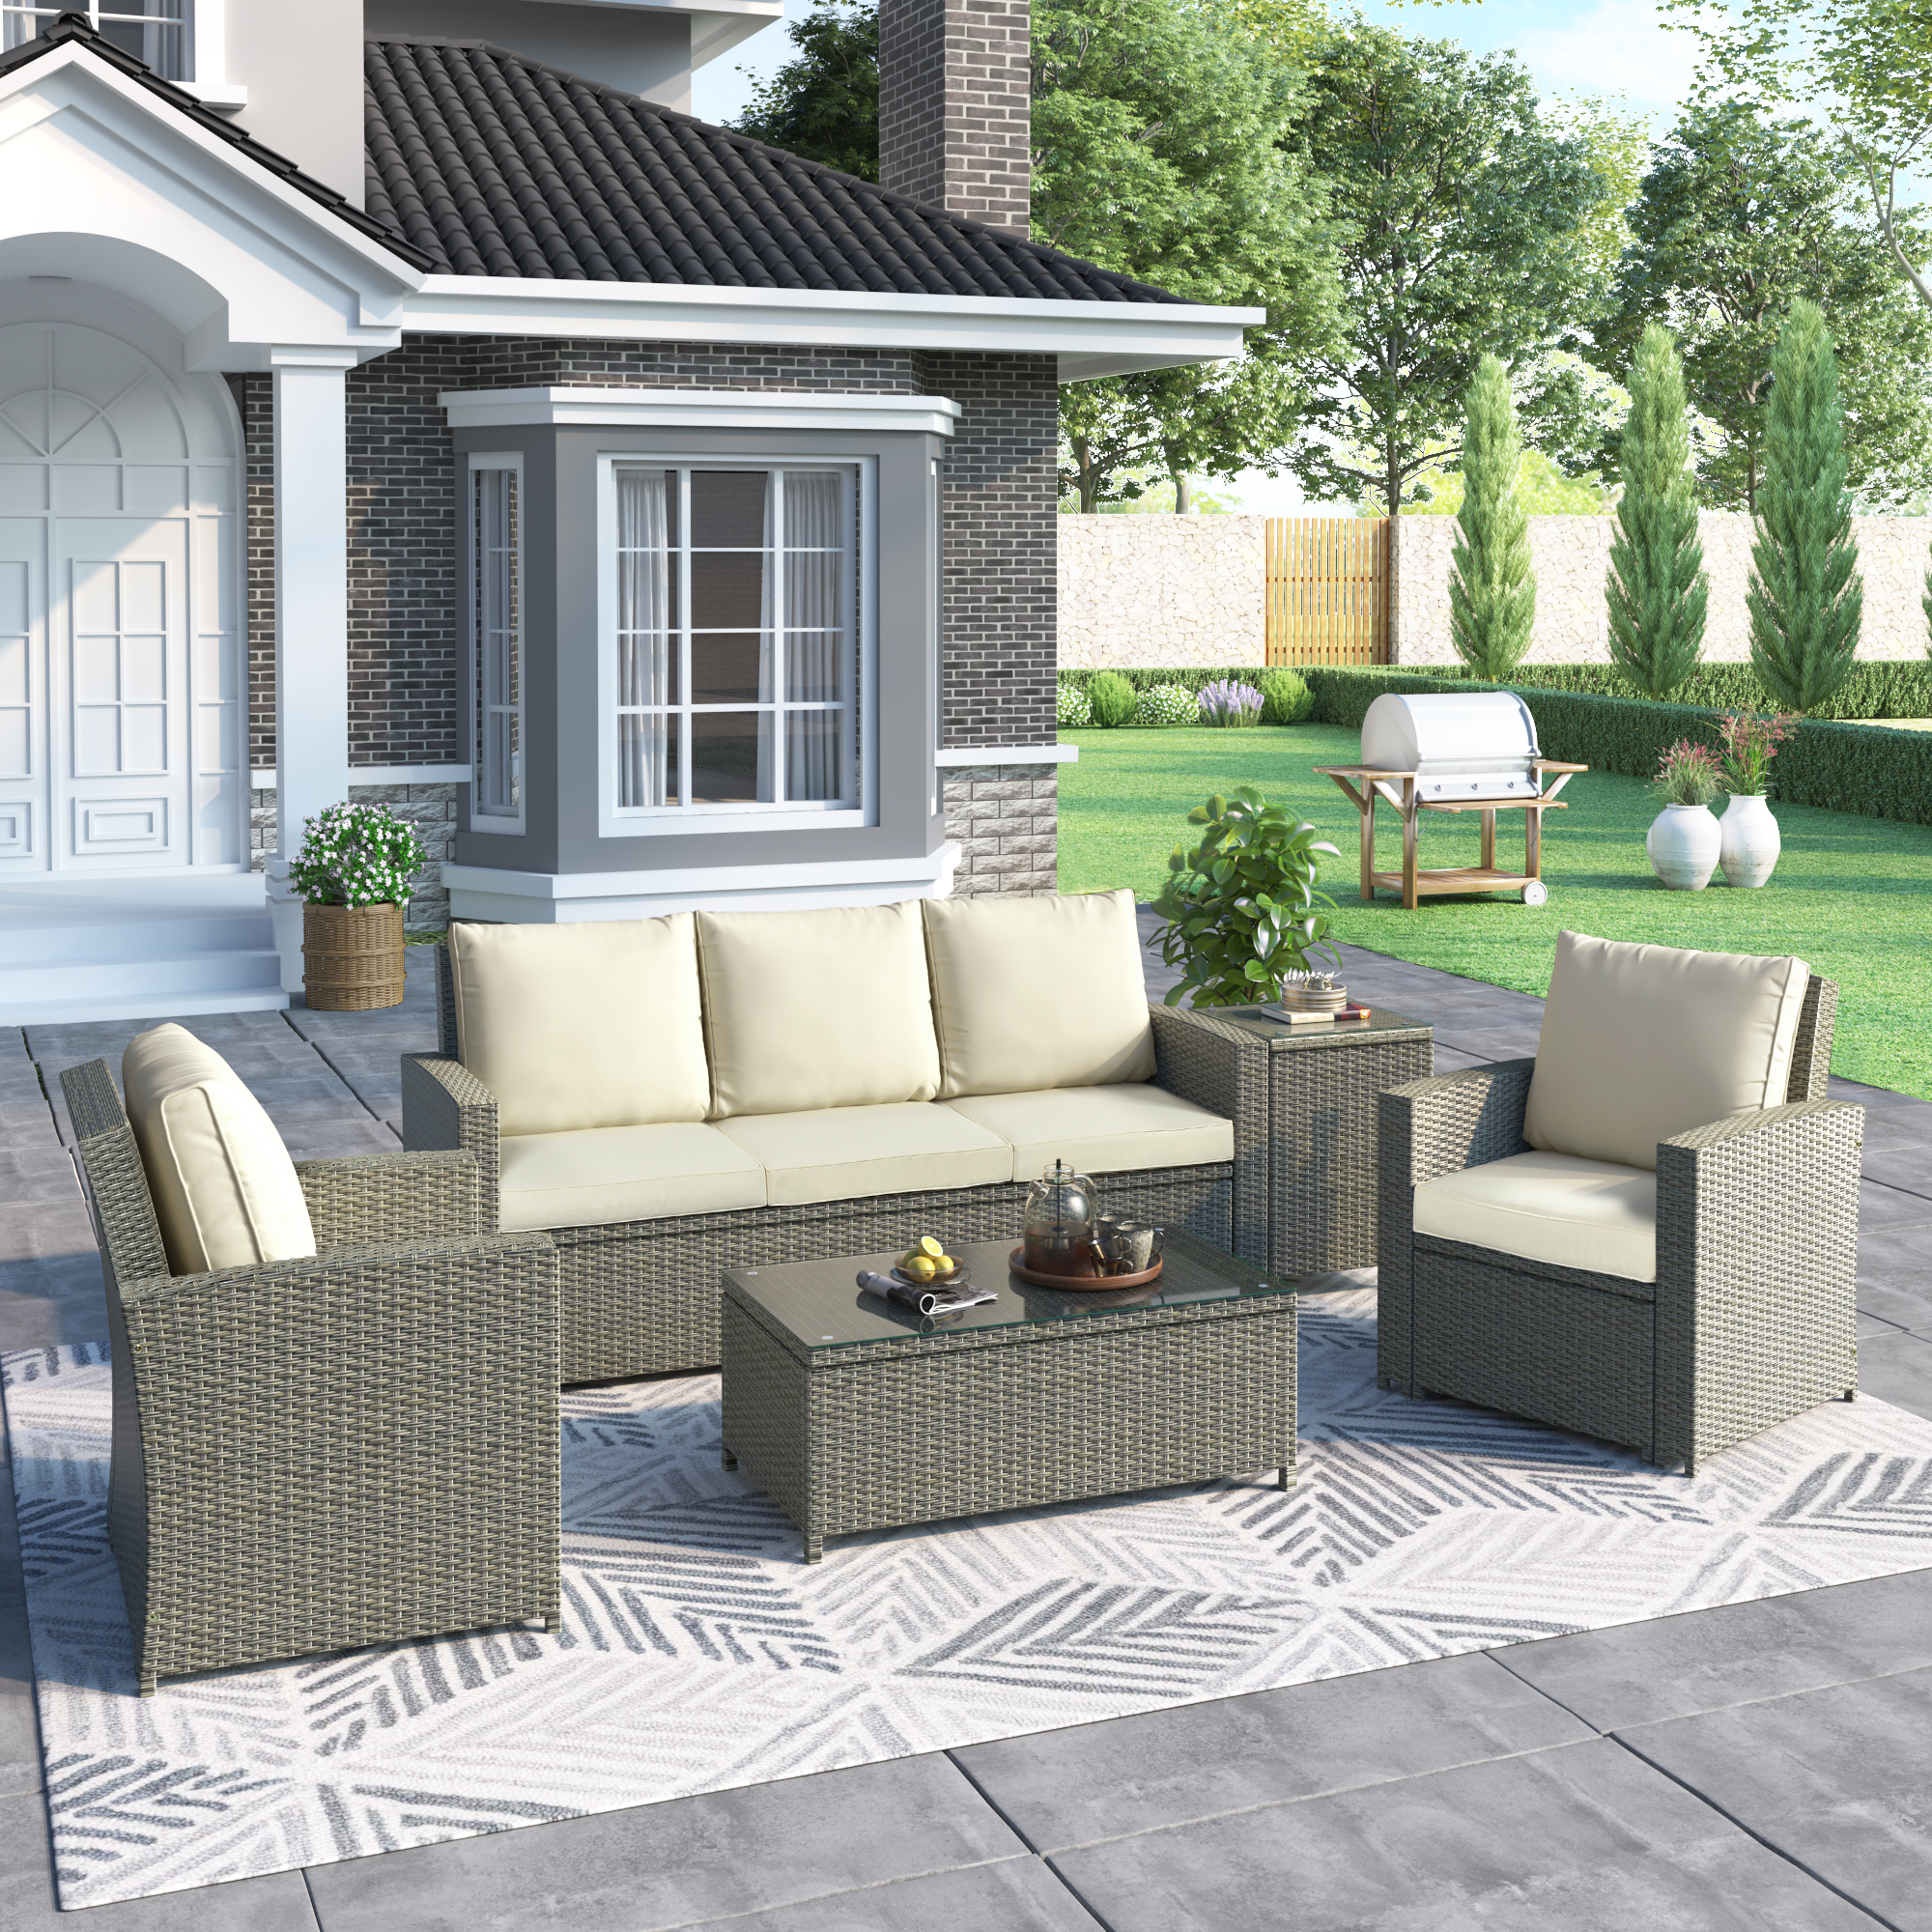 5 Piece Rattan Sectional Seating Group With Cushions And Table - WY000274AAA